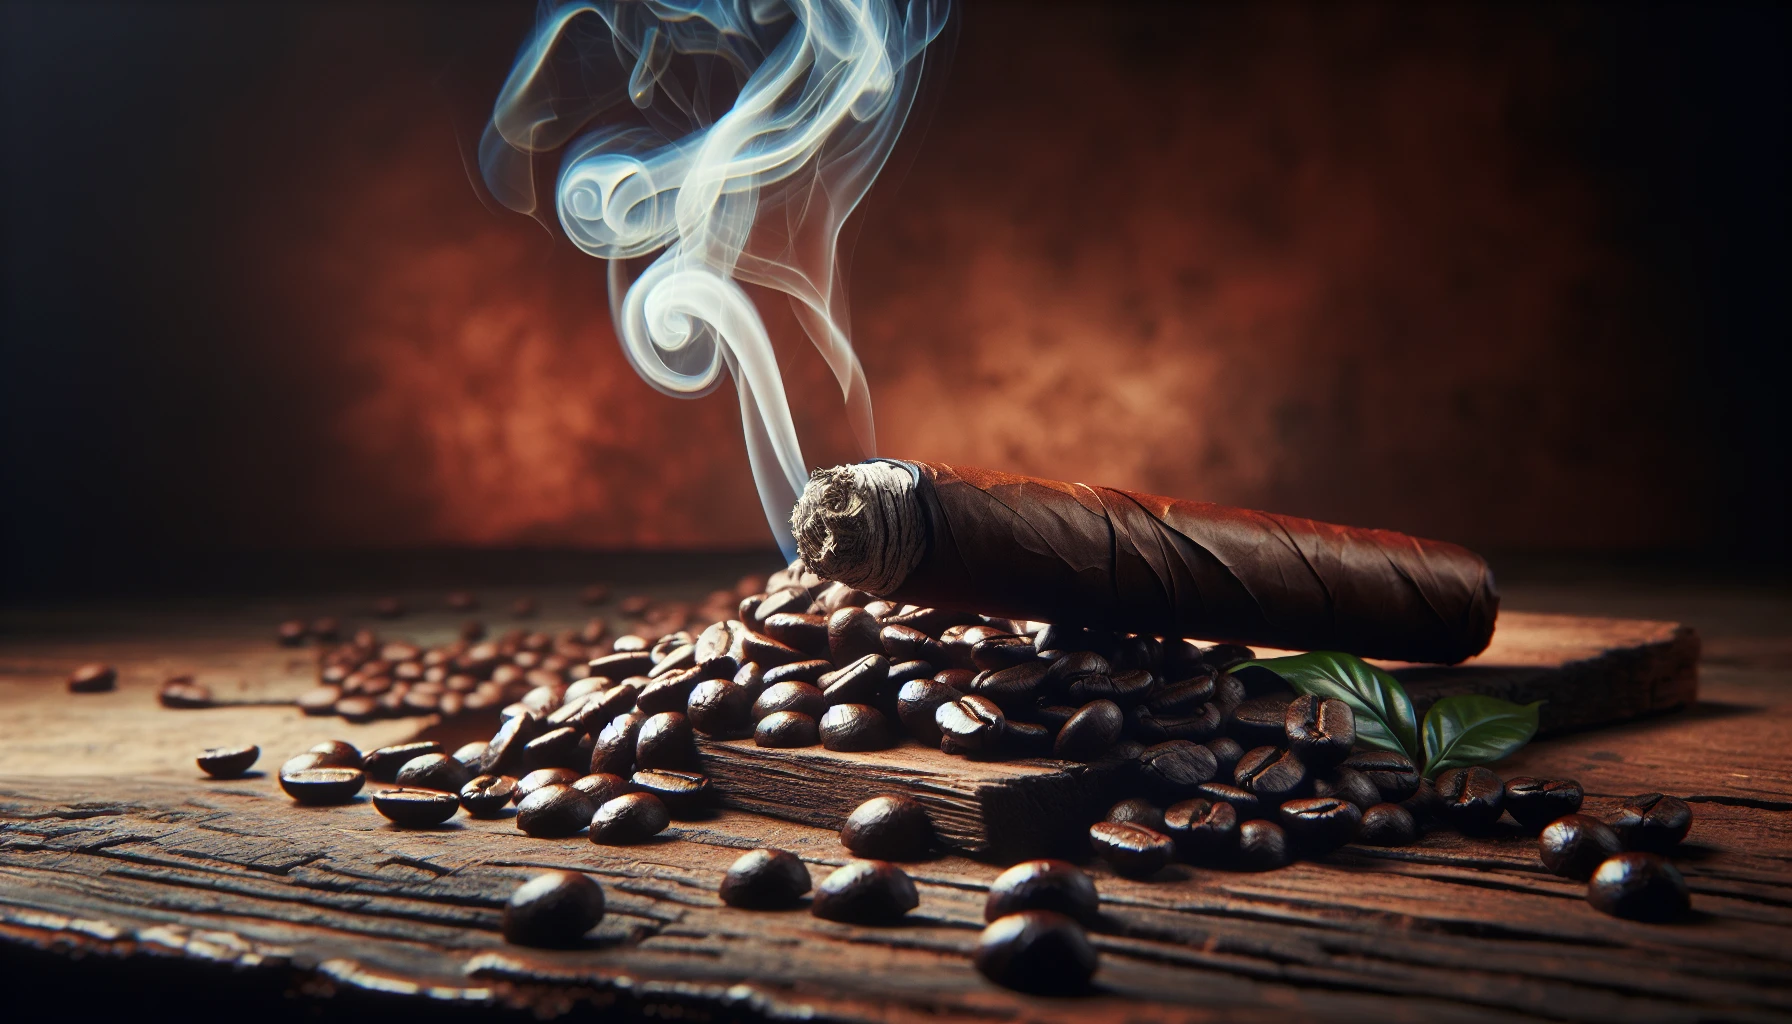 Aromatic coffee beans and a lit cigar, representing the flavor profile of the New World Gobernador Toro